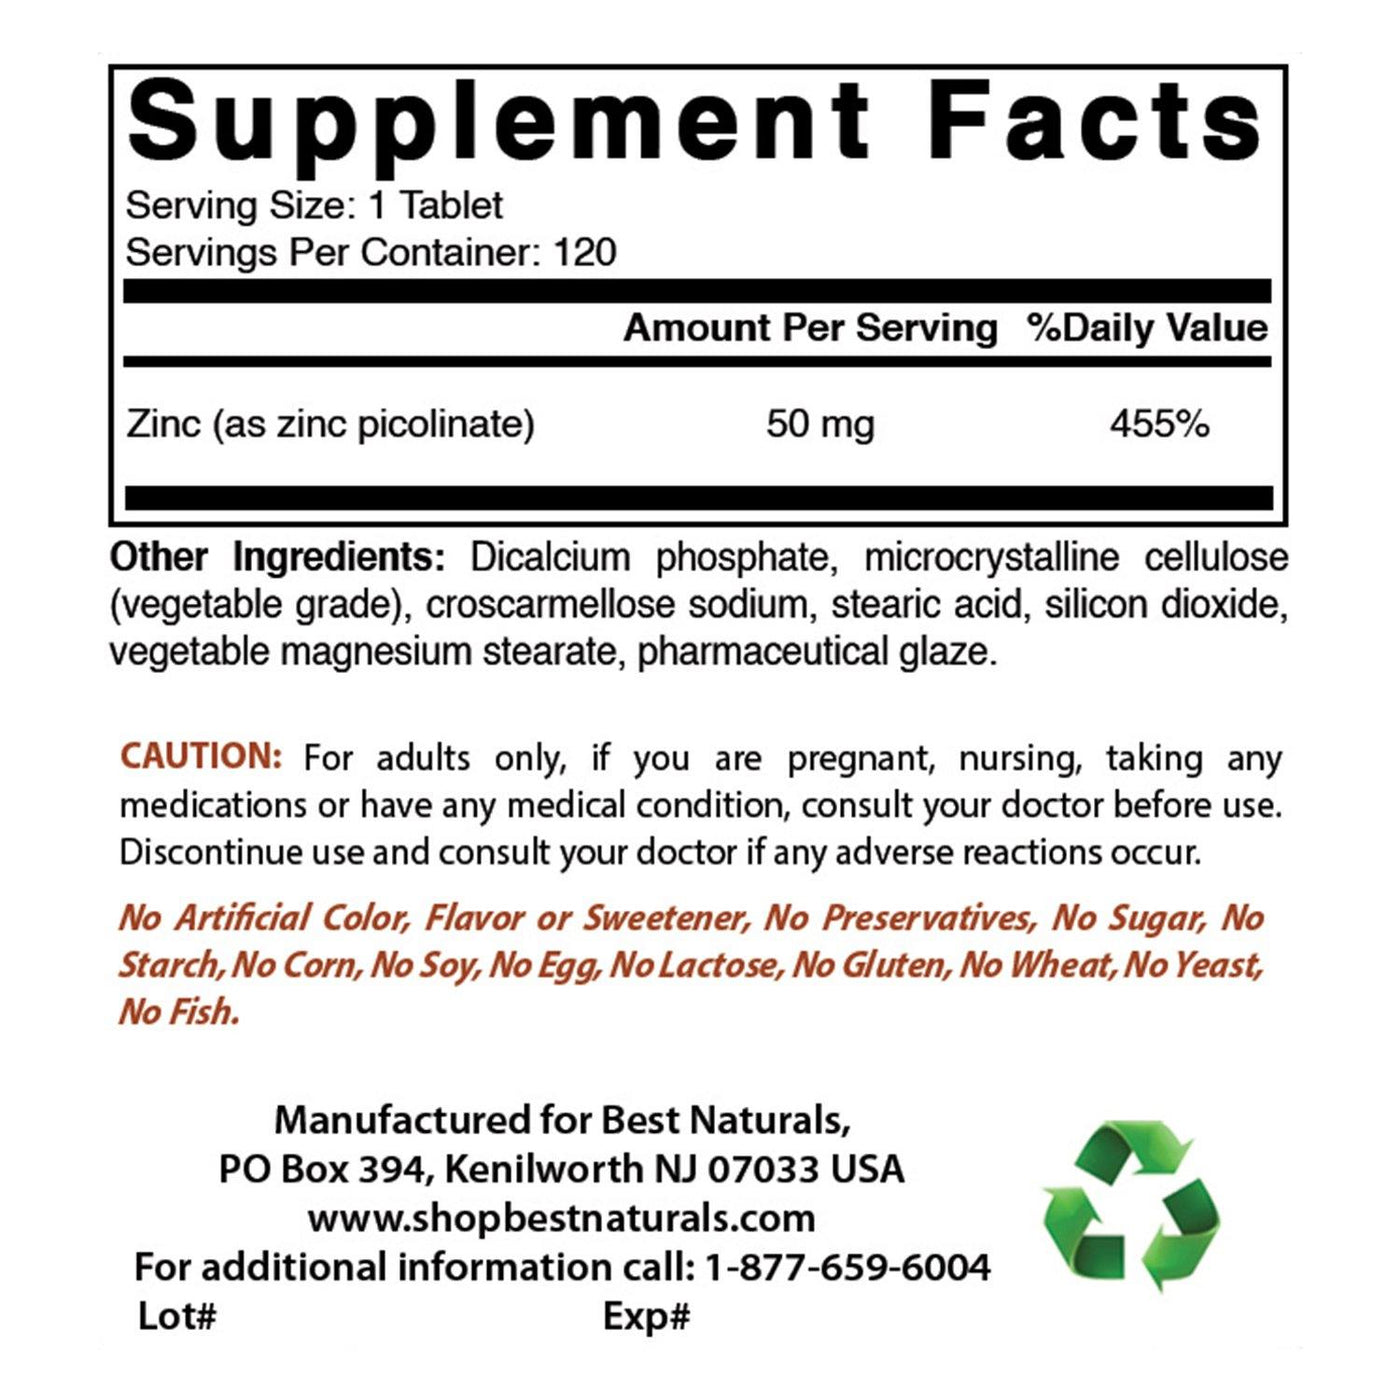  FORTE NATURALS 100 Zinc Supplements Specially Formulated for  Sensitive Stomachs, Vitamins for Adults Daily Supplement Vegan 50mg, Non  GMO, Easy to Swallow Zink Vitaminas : Health & Household